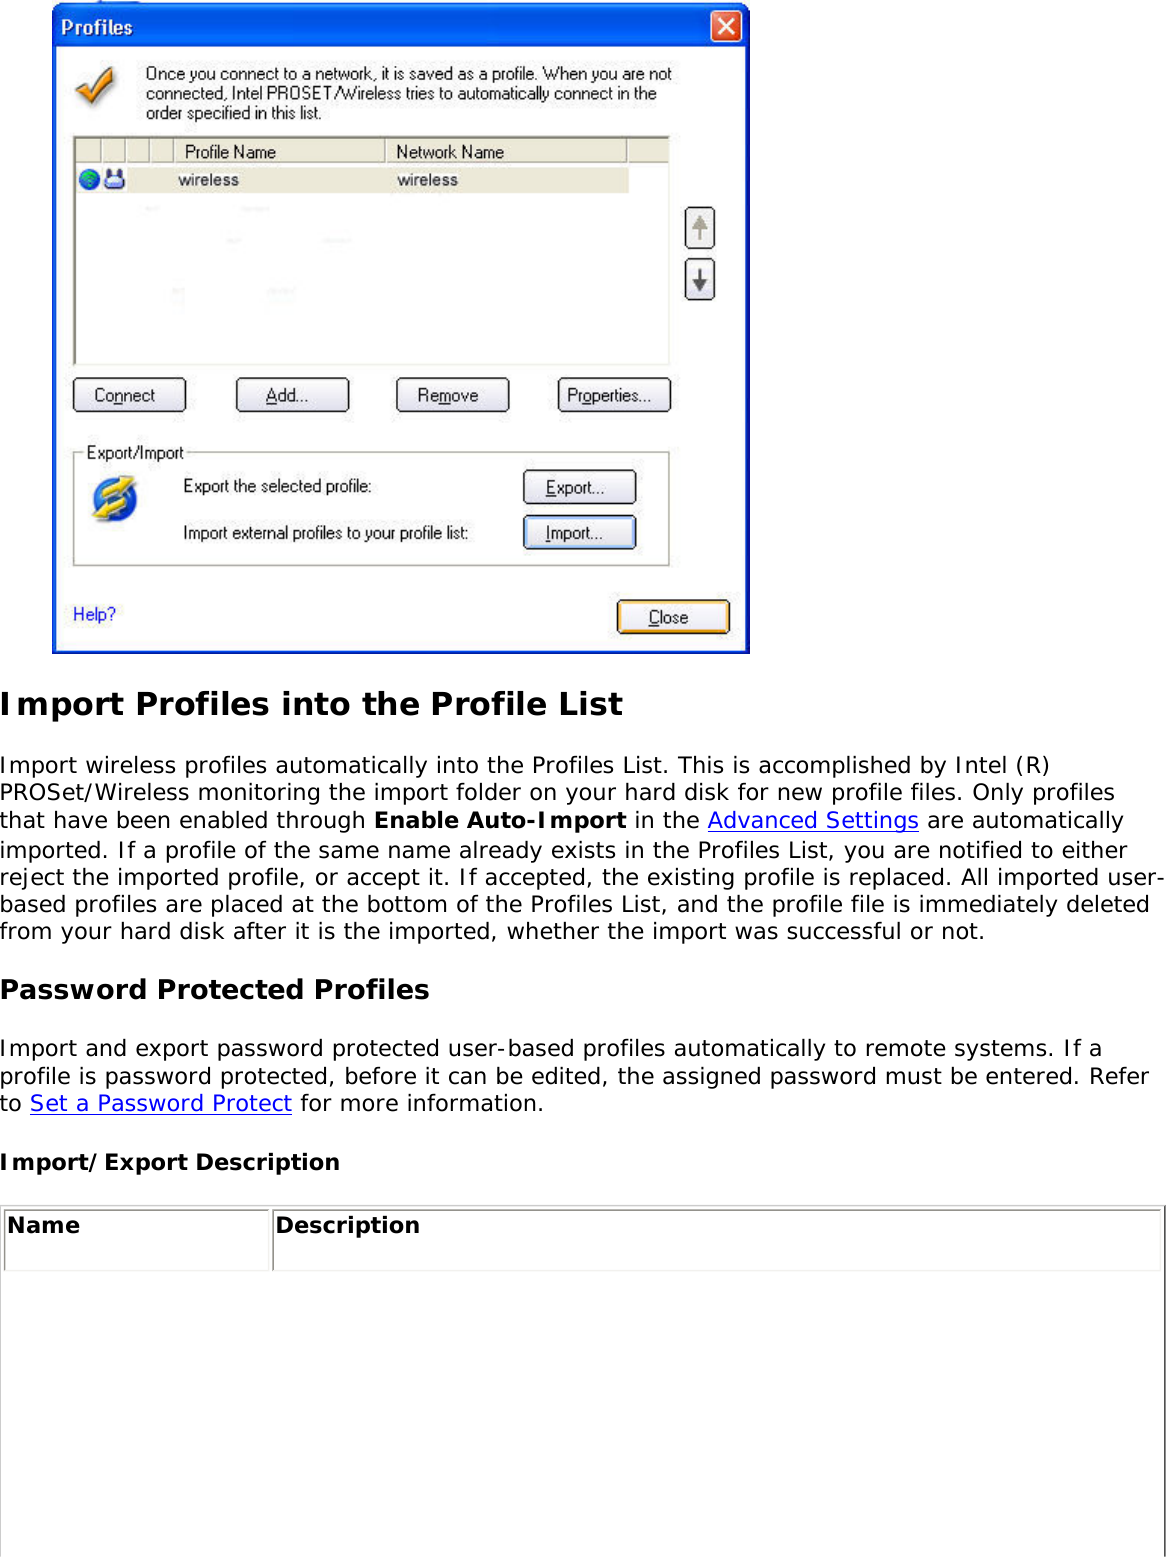  Import Profiles into the Profile ListImport wireless profiles automatically into the Profiles List. This is accomplished by Intel (R) PROSet/Wireless monitoring the import folder on your hard disk for new profile files. Only profiles that have been enabled through Enable Auto-Import in the Advanced Settings are automatically imported. If a profile of the same name already exists in the Profiles List, you are notified to either reject the imported profile, or accept it. If accepted, the existing profile is replaced. All imported user-based profiles are placed at the bottom of the Profiles List, and the profile file is immediately deleted from your hard disk after it is the imported, whether the import was successful or not. Password Protected ProfilesImport and export password protected user-based profiles automatically to remote systems. If a profile is password protected, before it can be edited, the assigned password must be entered. Refer to Set a Password Protect for more information. Import/Export Description Name  Description 